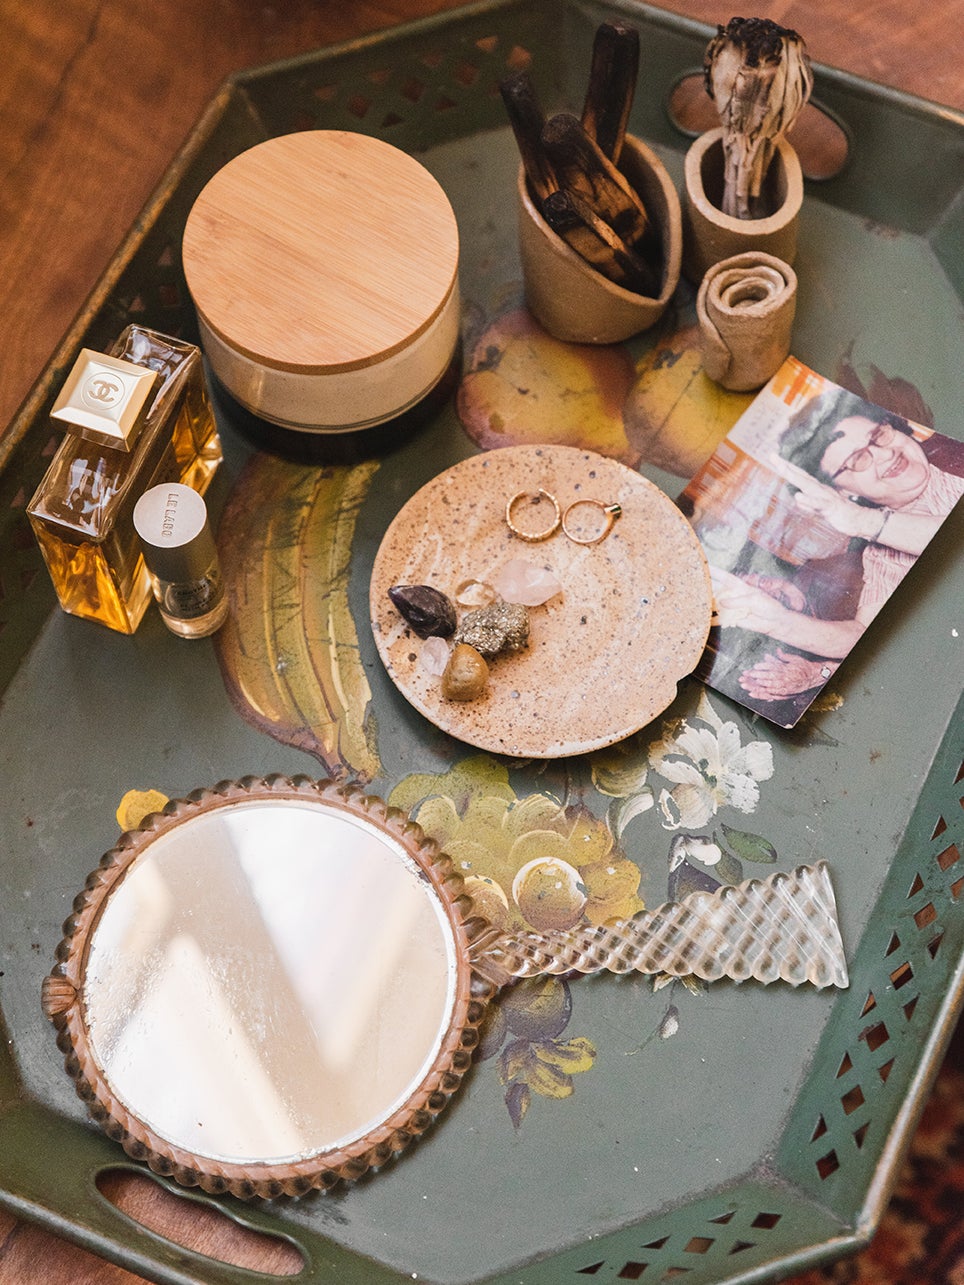 mirror and jewlery and photos on a tray